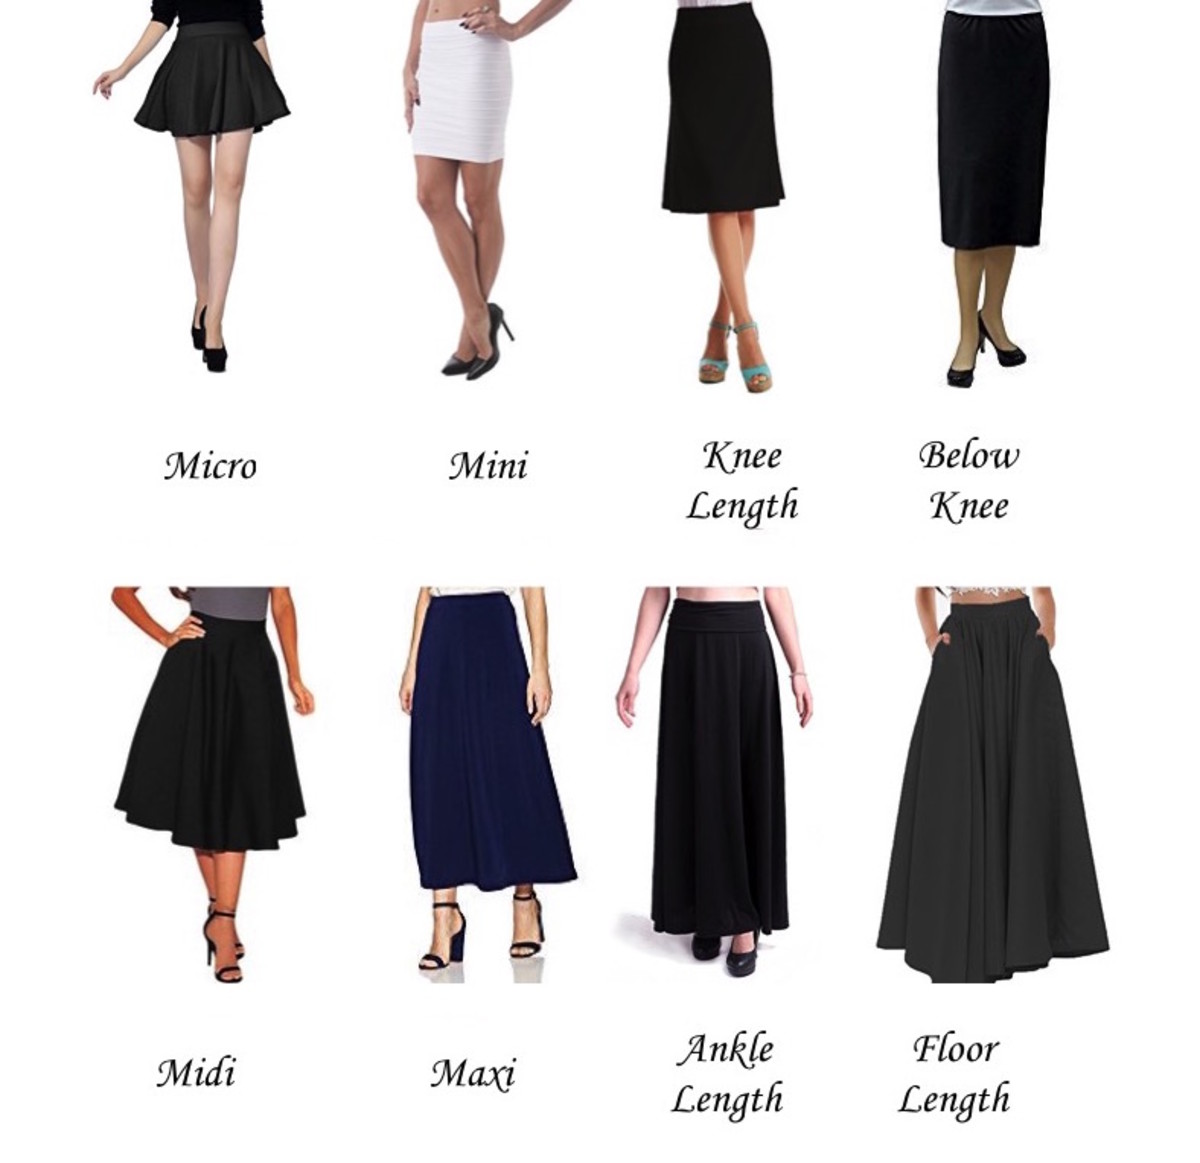 A-Z List of Types and Silhouettes of Skirts in Fashion | HubPages